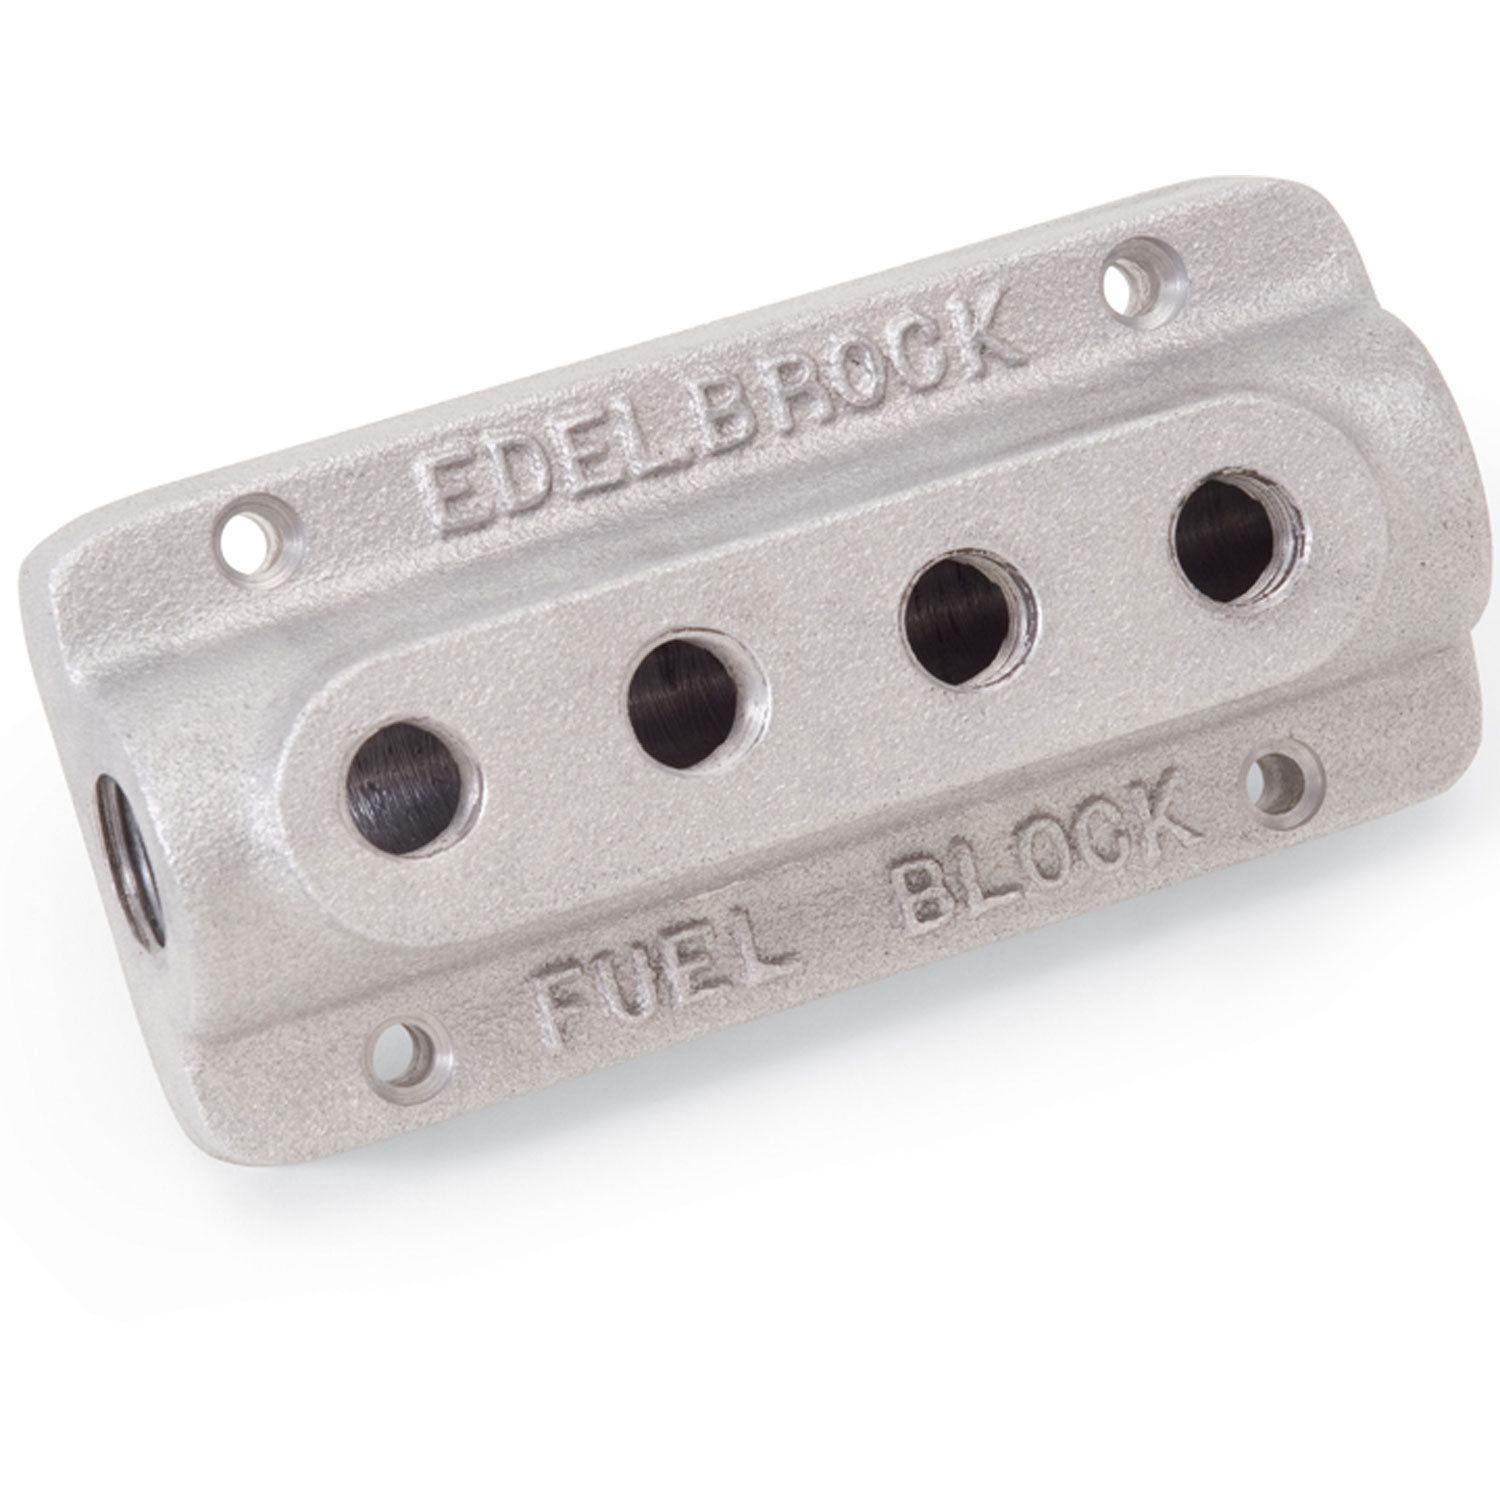 Firewall Mounted Quad Outlet Fuel Block